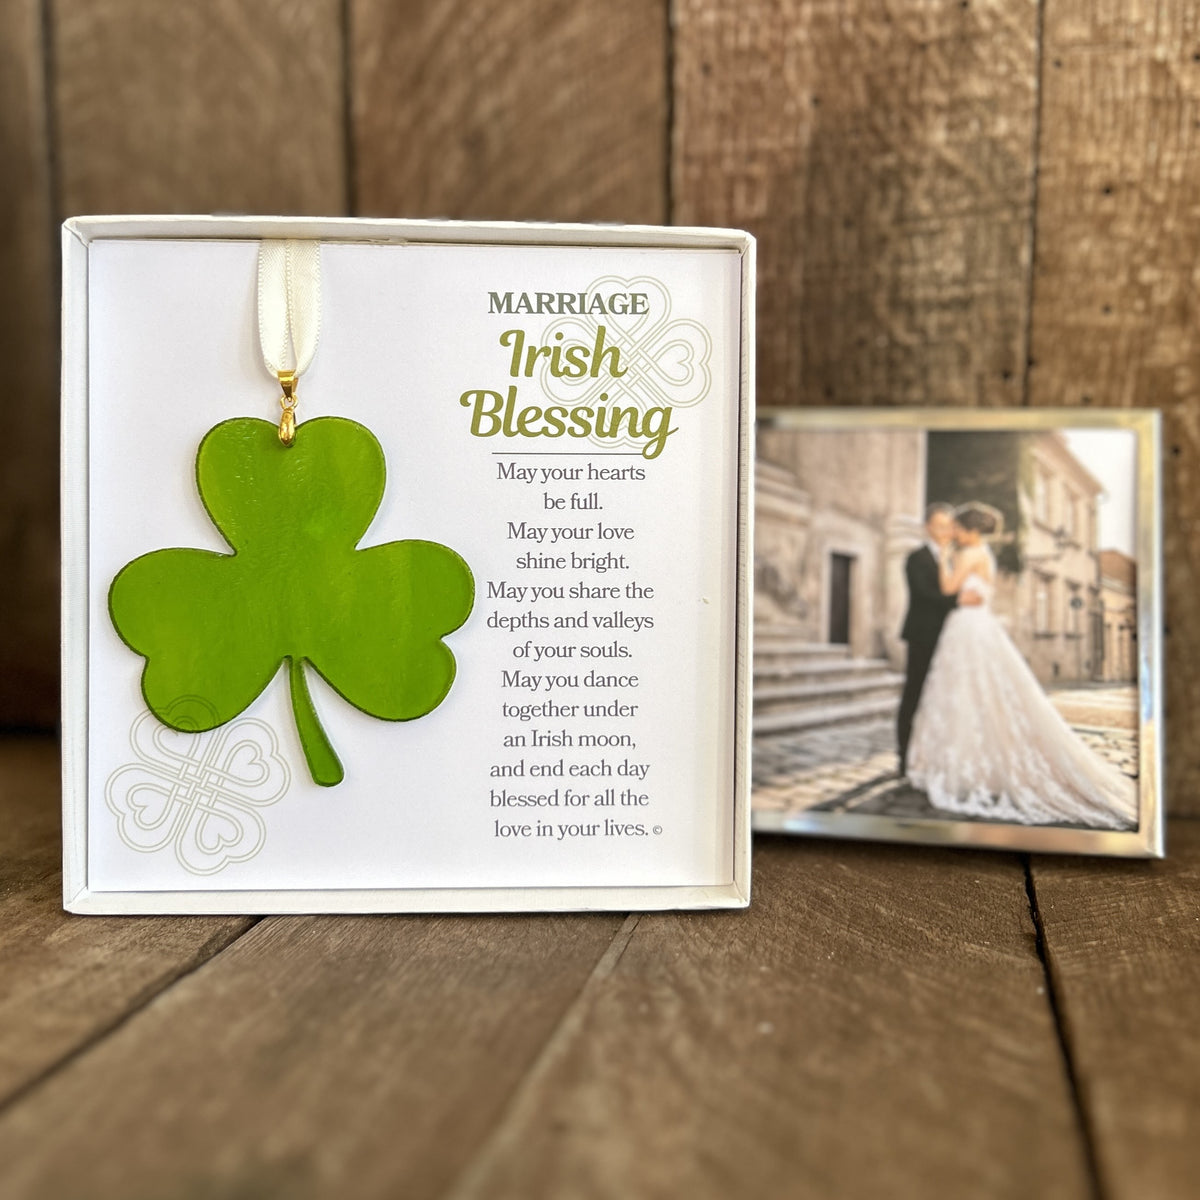 Marriage Irish Blessing Gift with wedding photo in background.